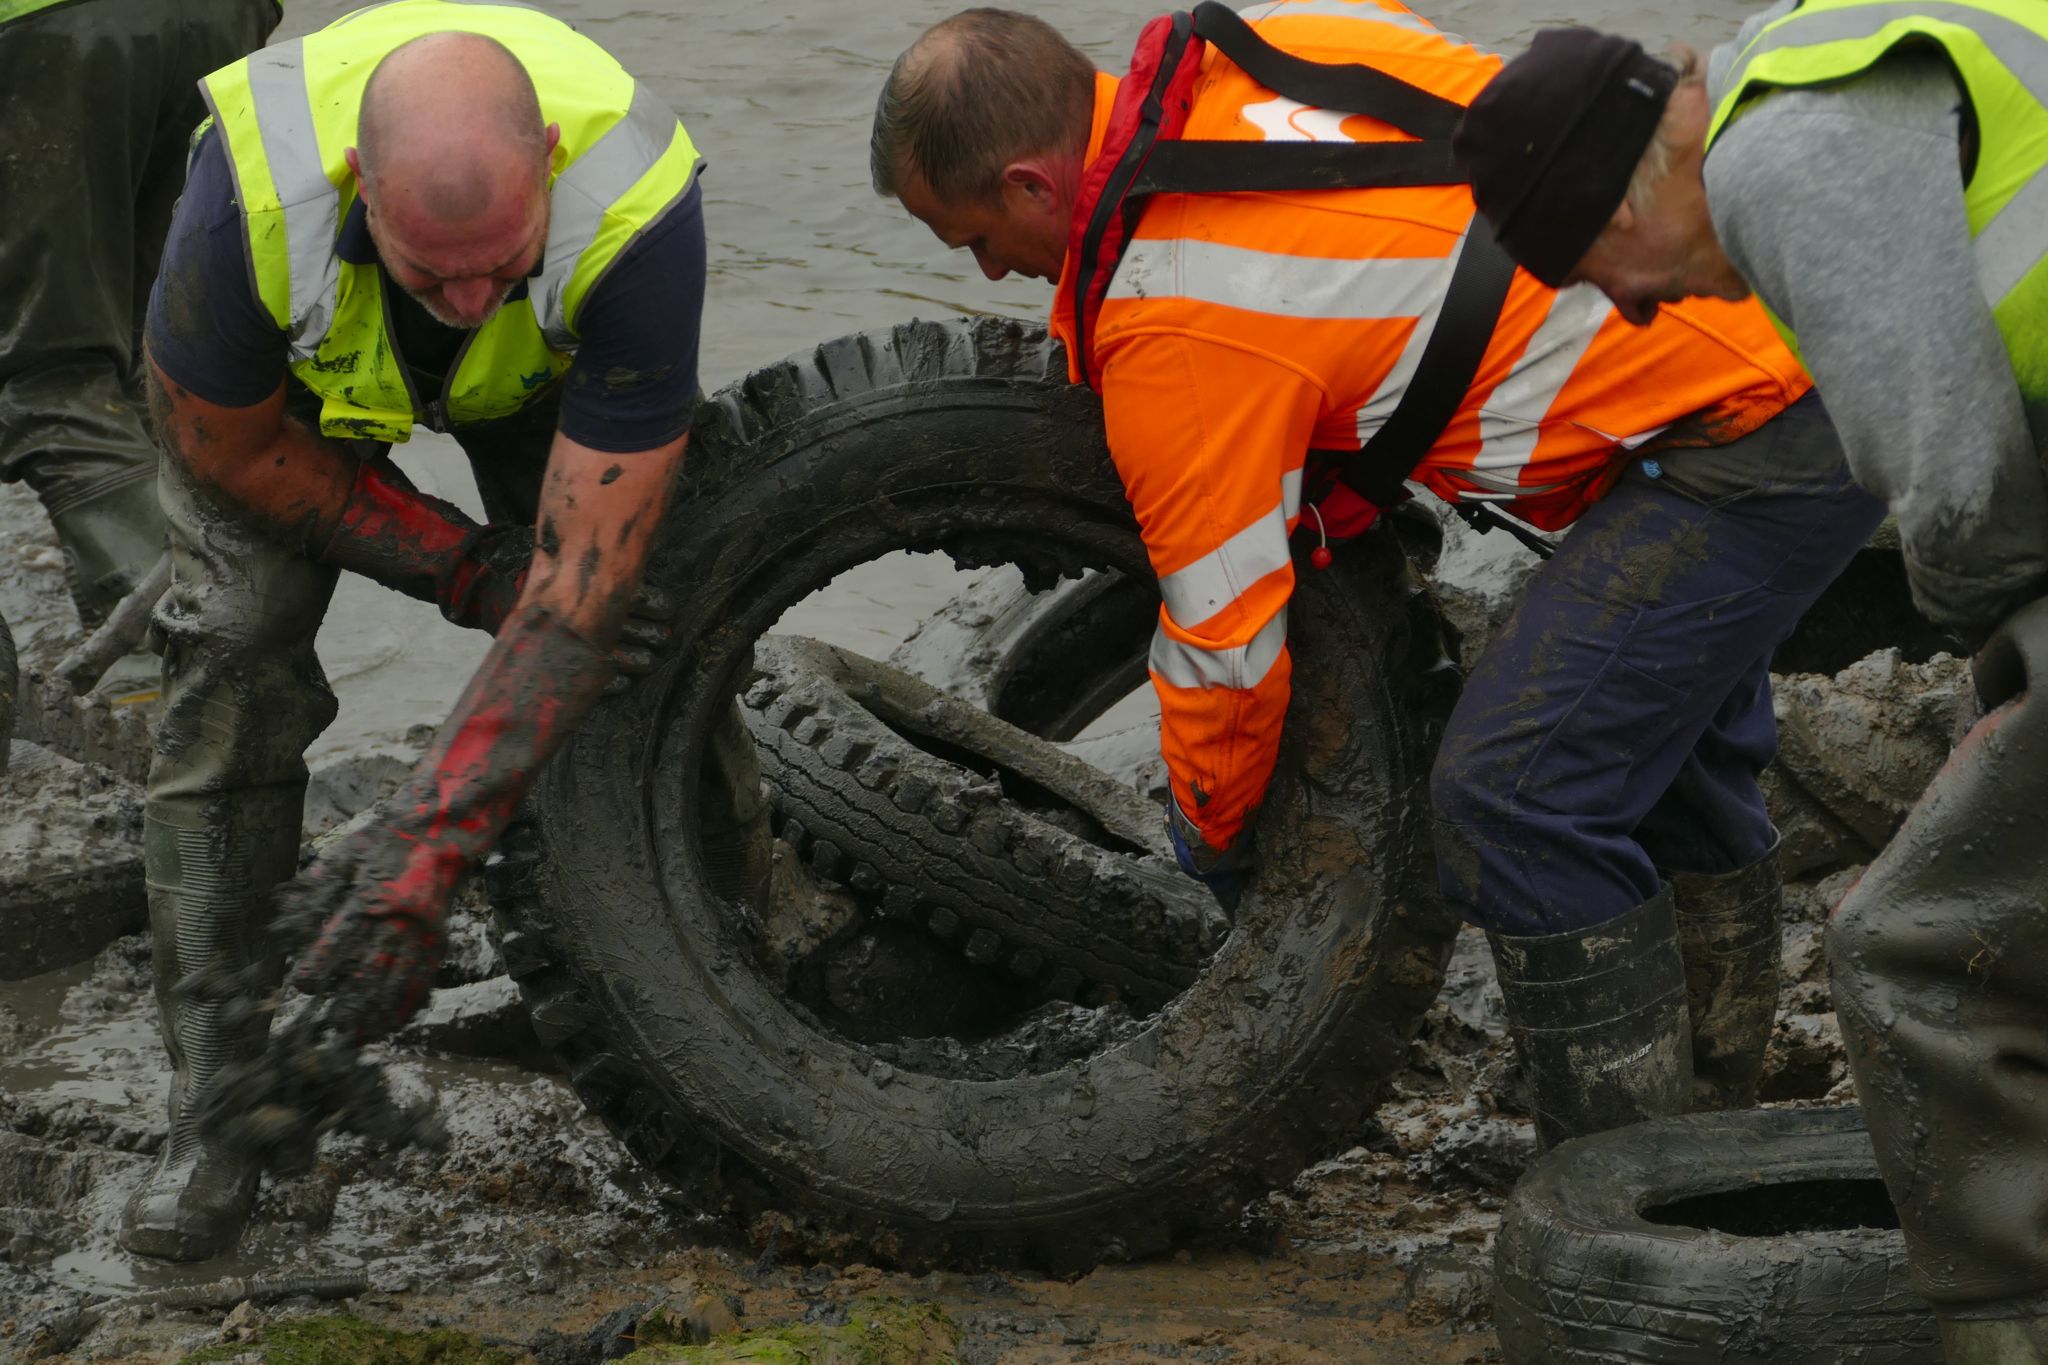 Volunteers wheeling a tyre out of the muddy river